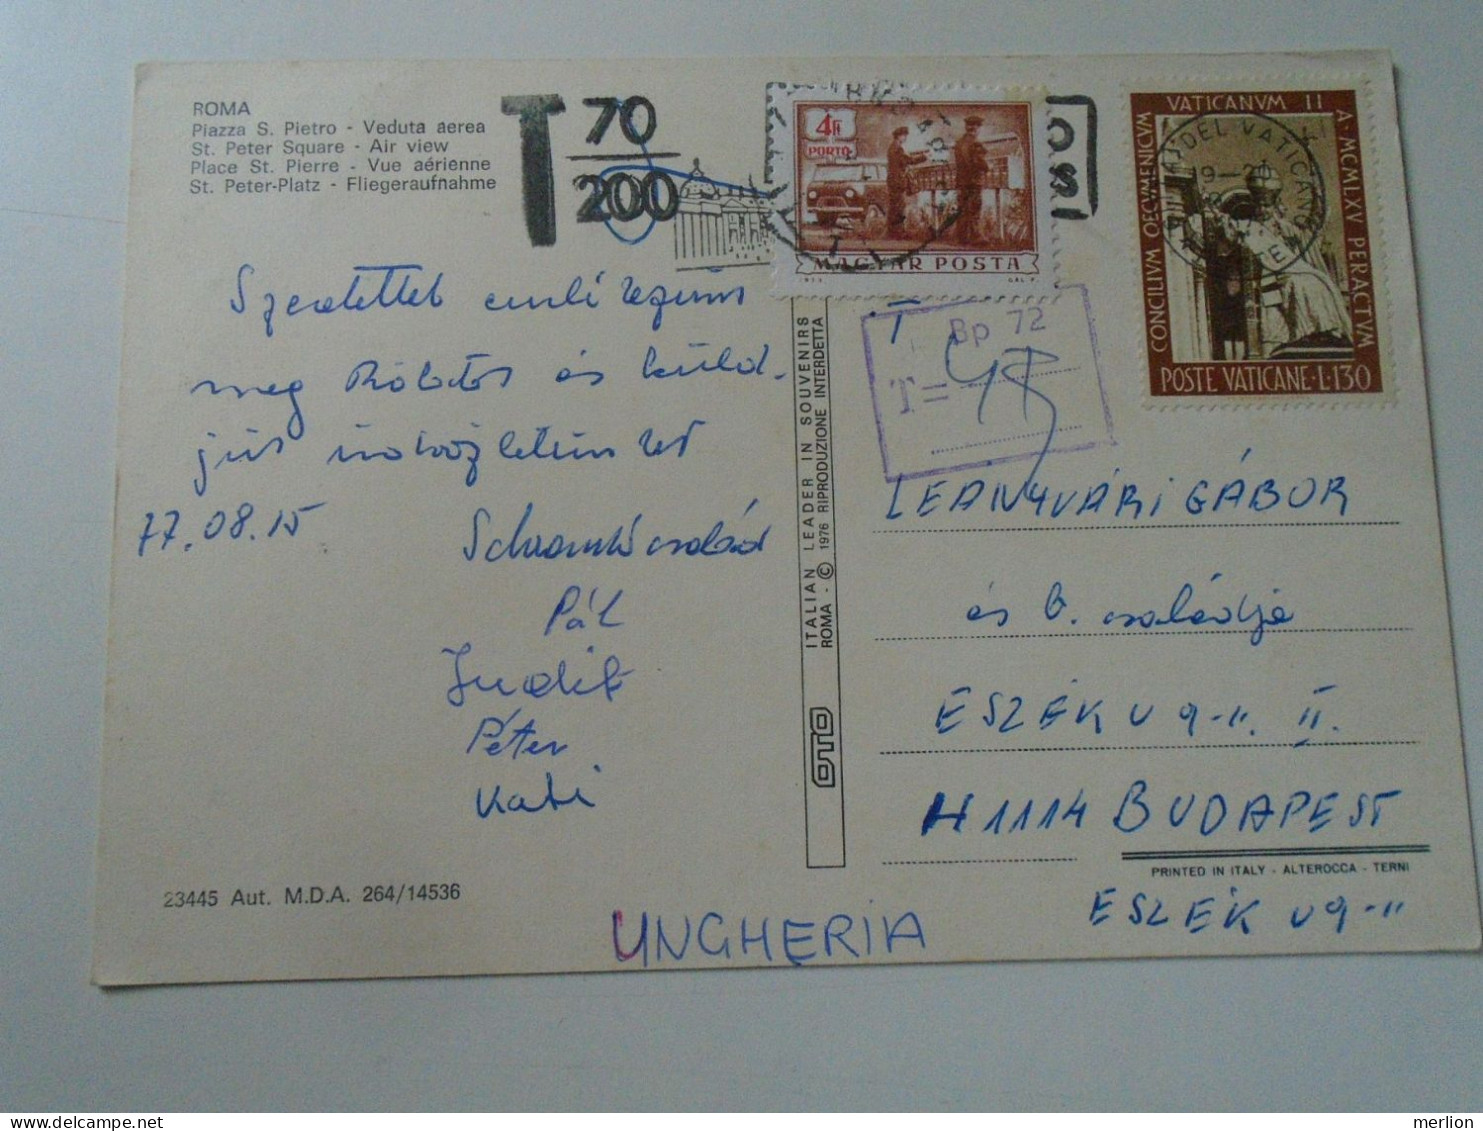 D199199 Vatican  - Postcard - Postage Due  1977 Hungary  Porto Stamp - Postage Due